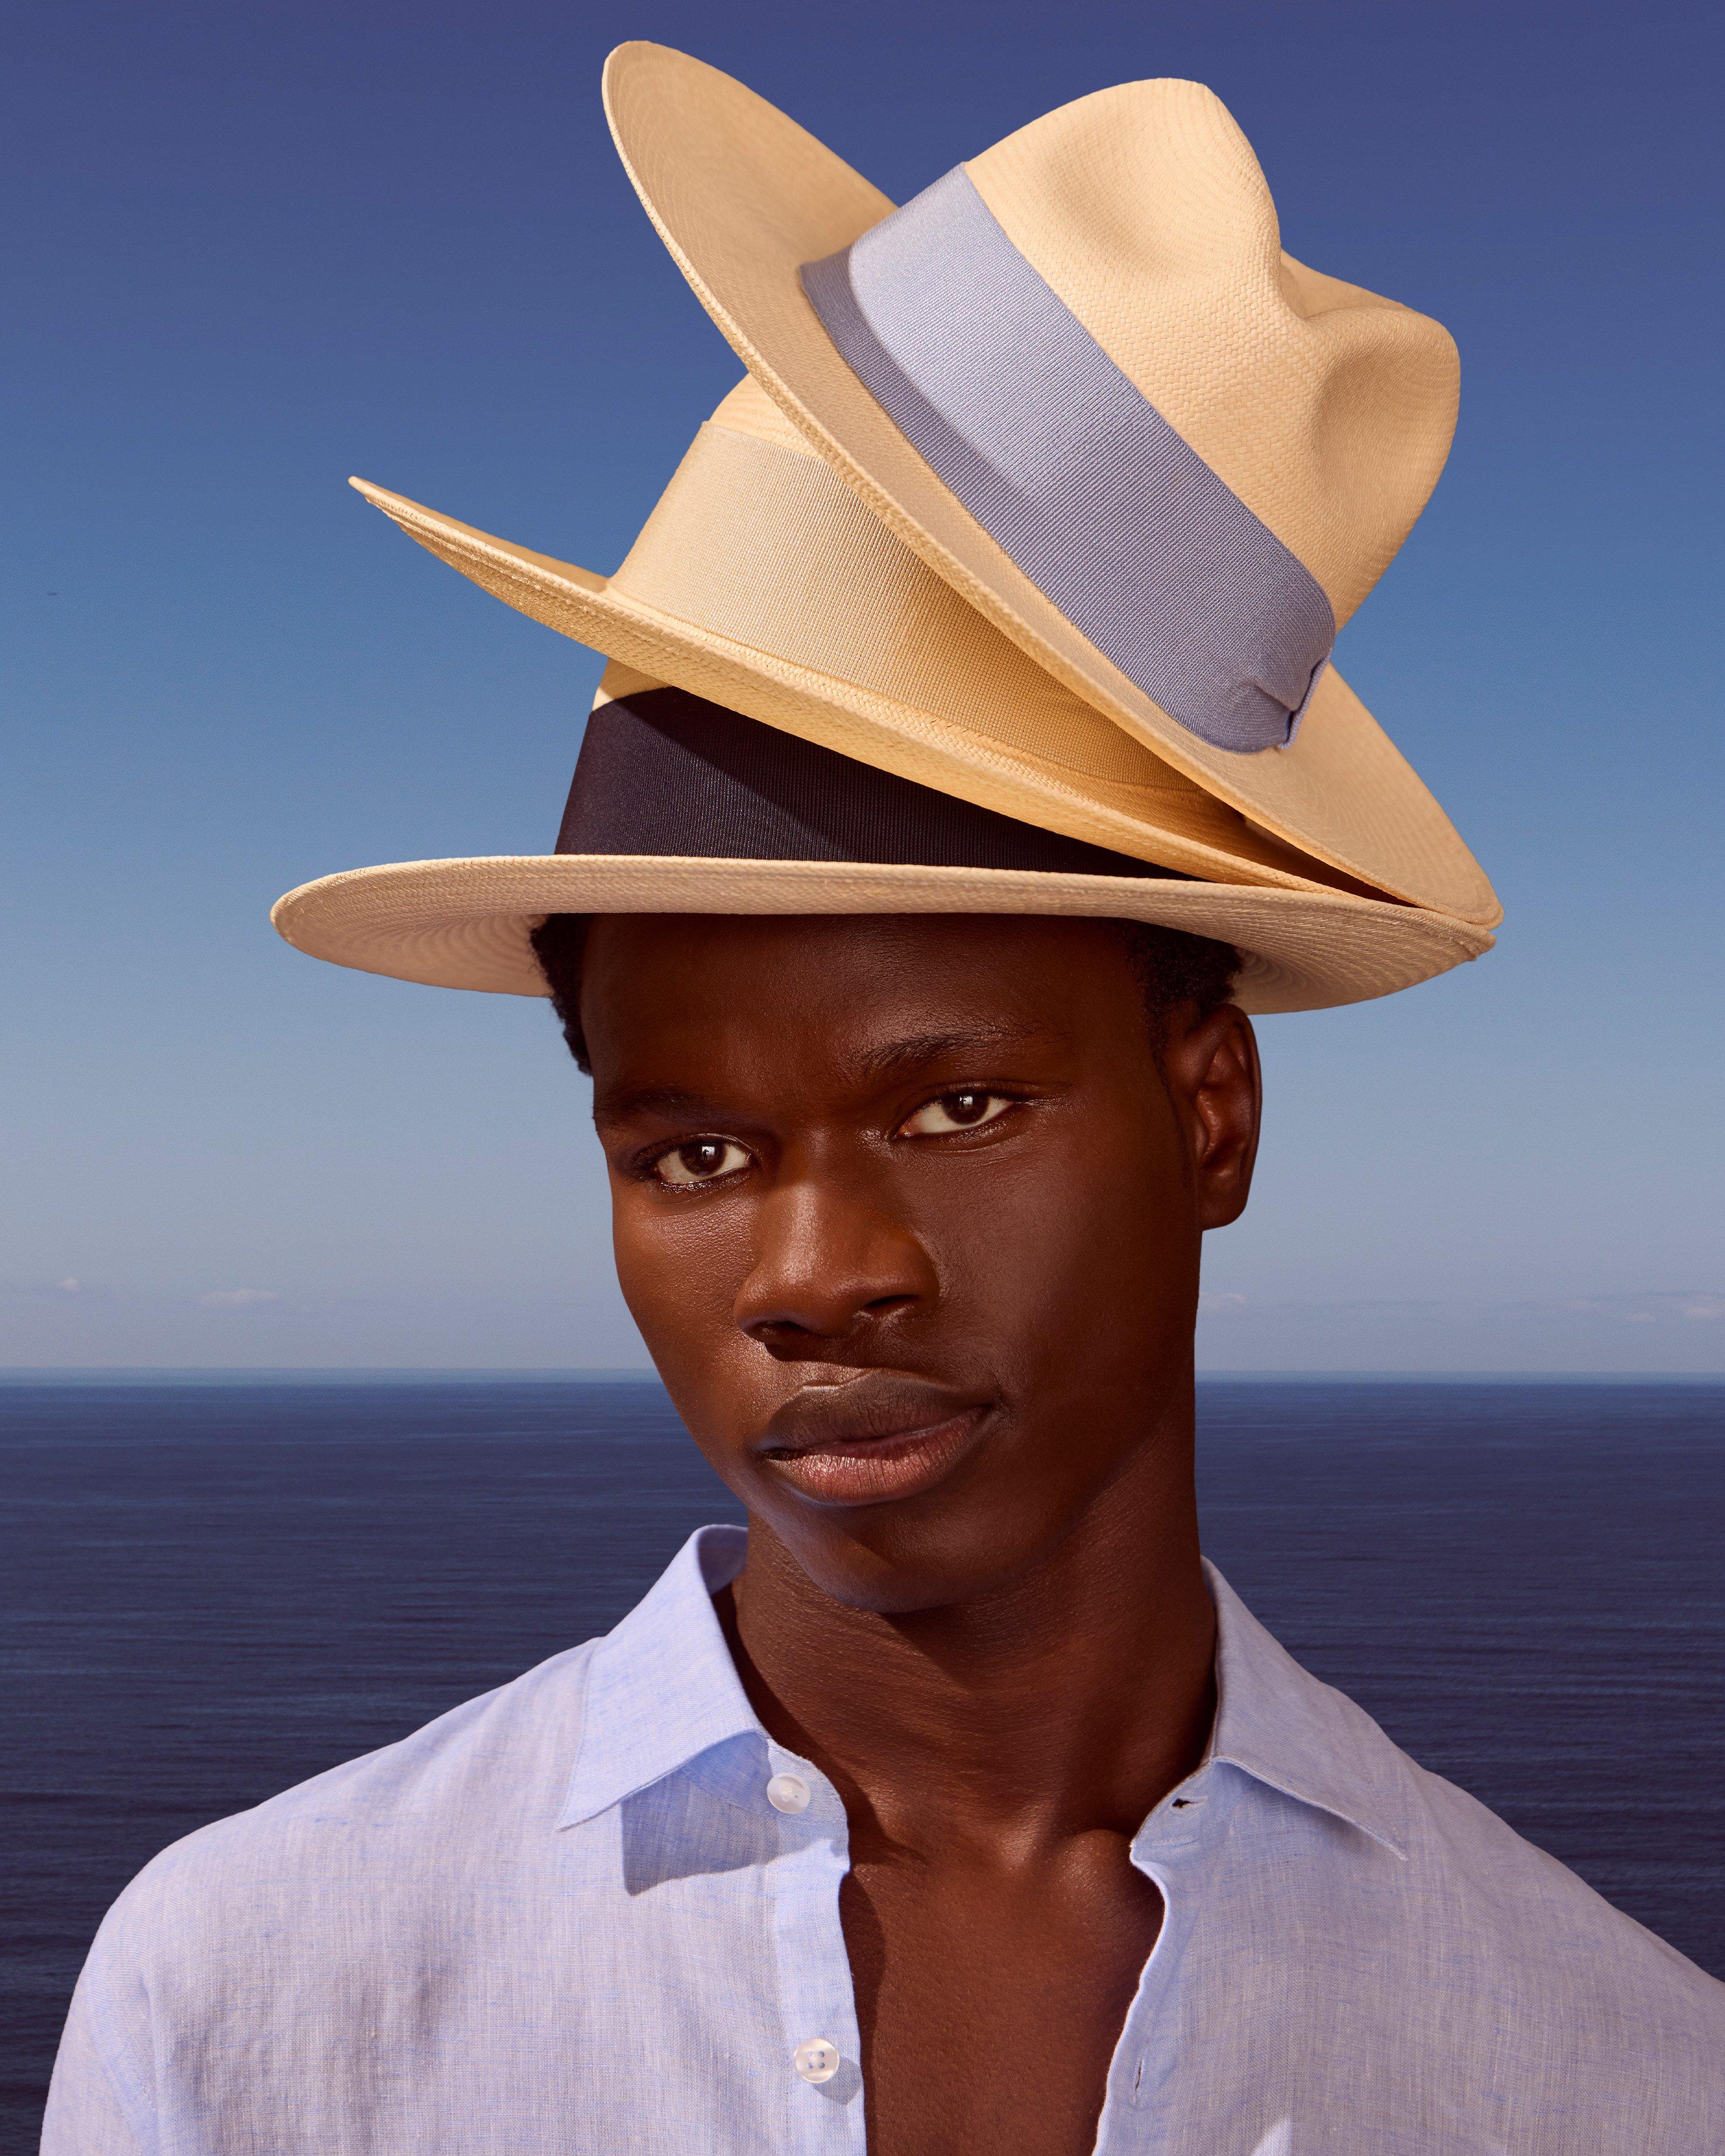 A man with three hats on his head, one on top of the other